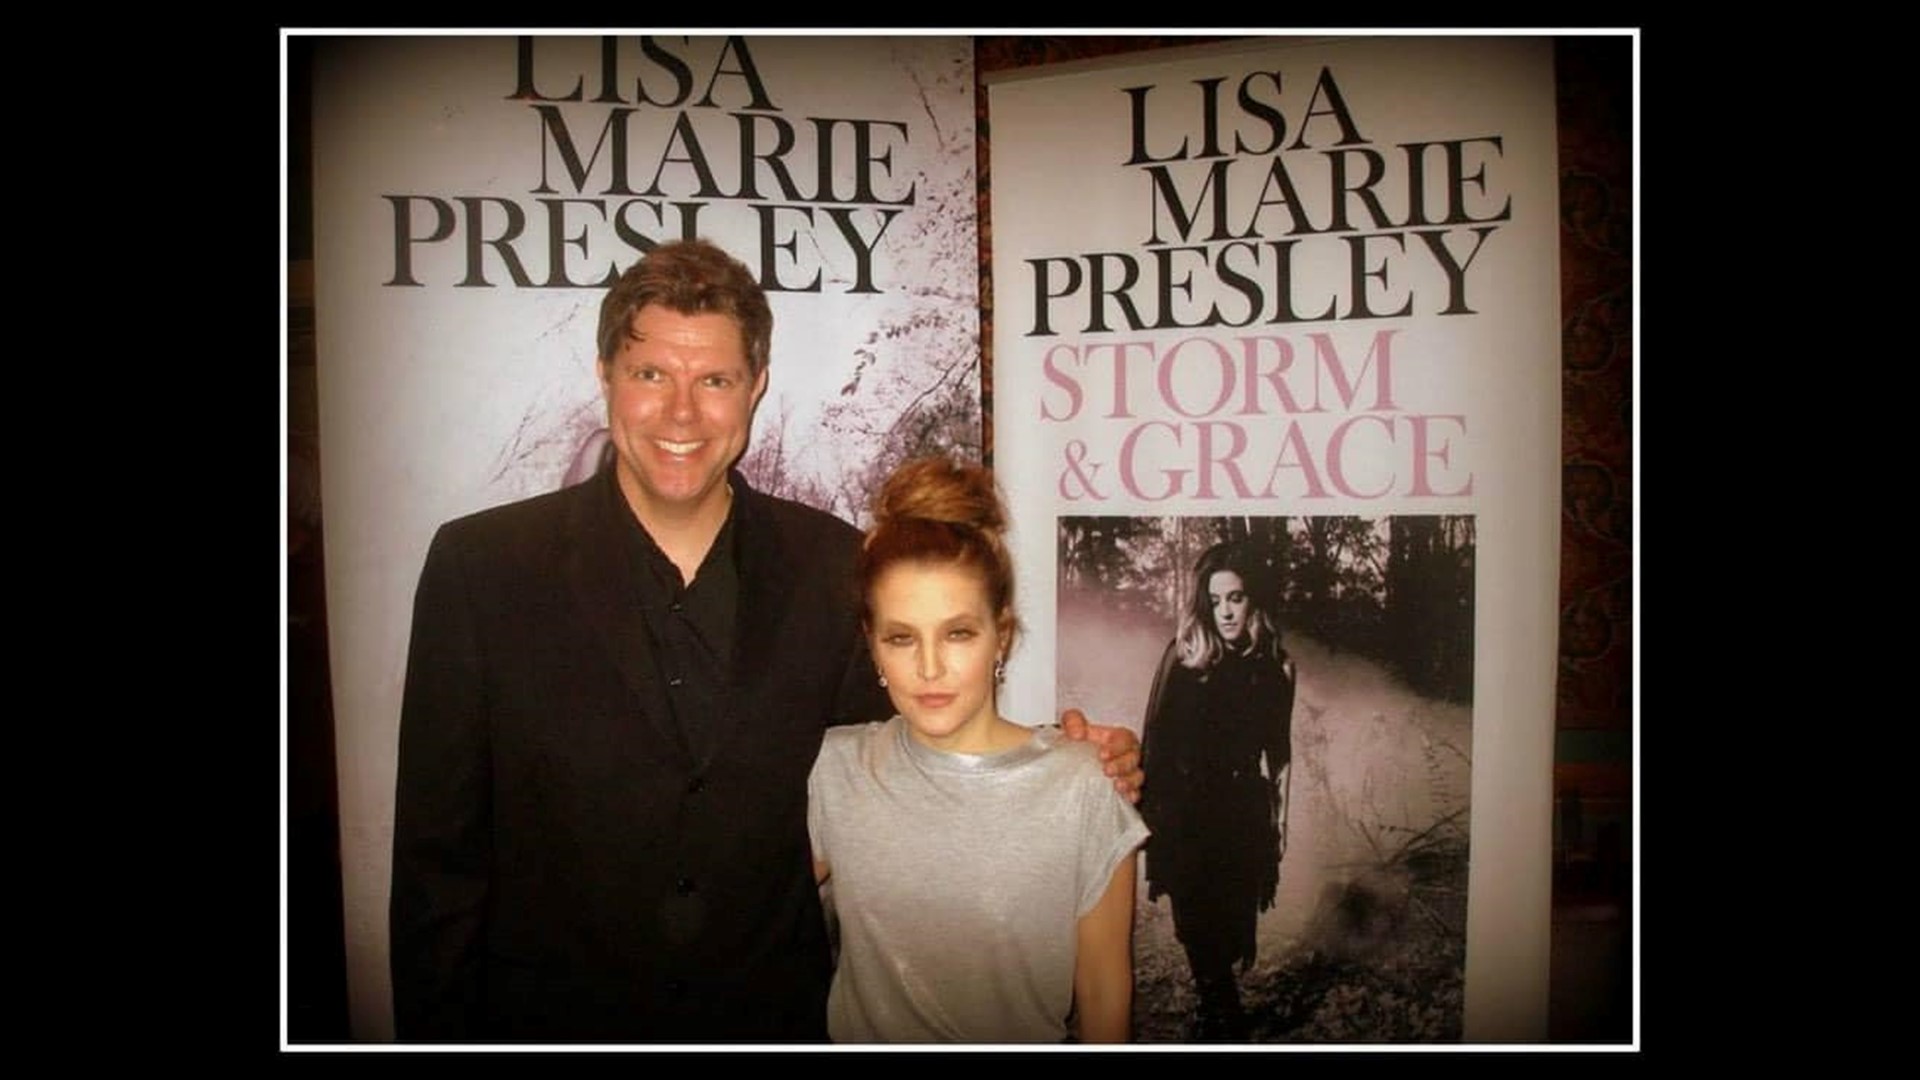 Alan Stout of Luzerne County looks back fondly at his interview and meeting with Lisa Marie Presley after learning of her passing.